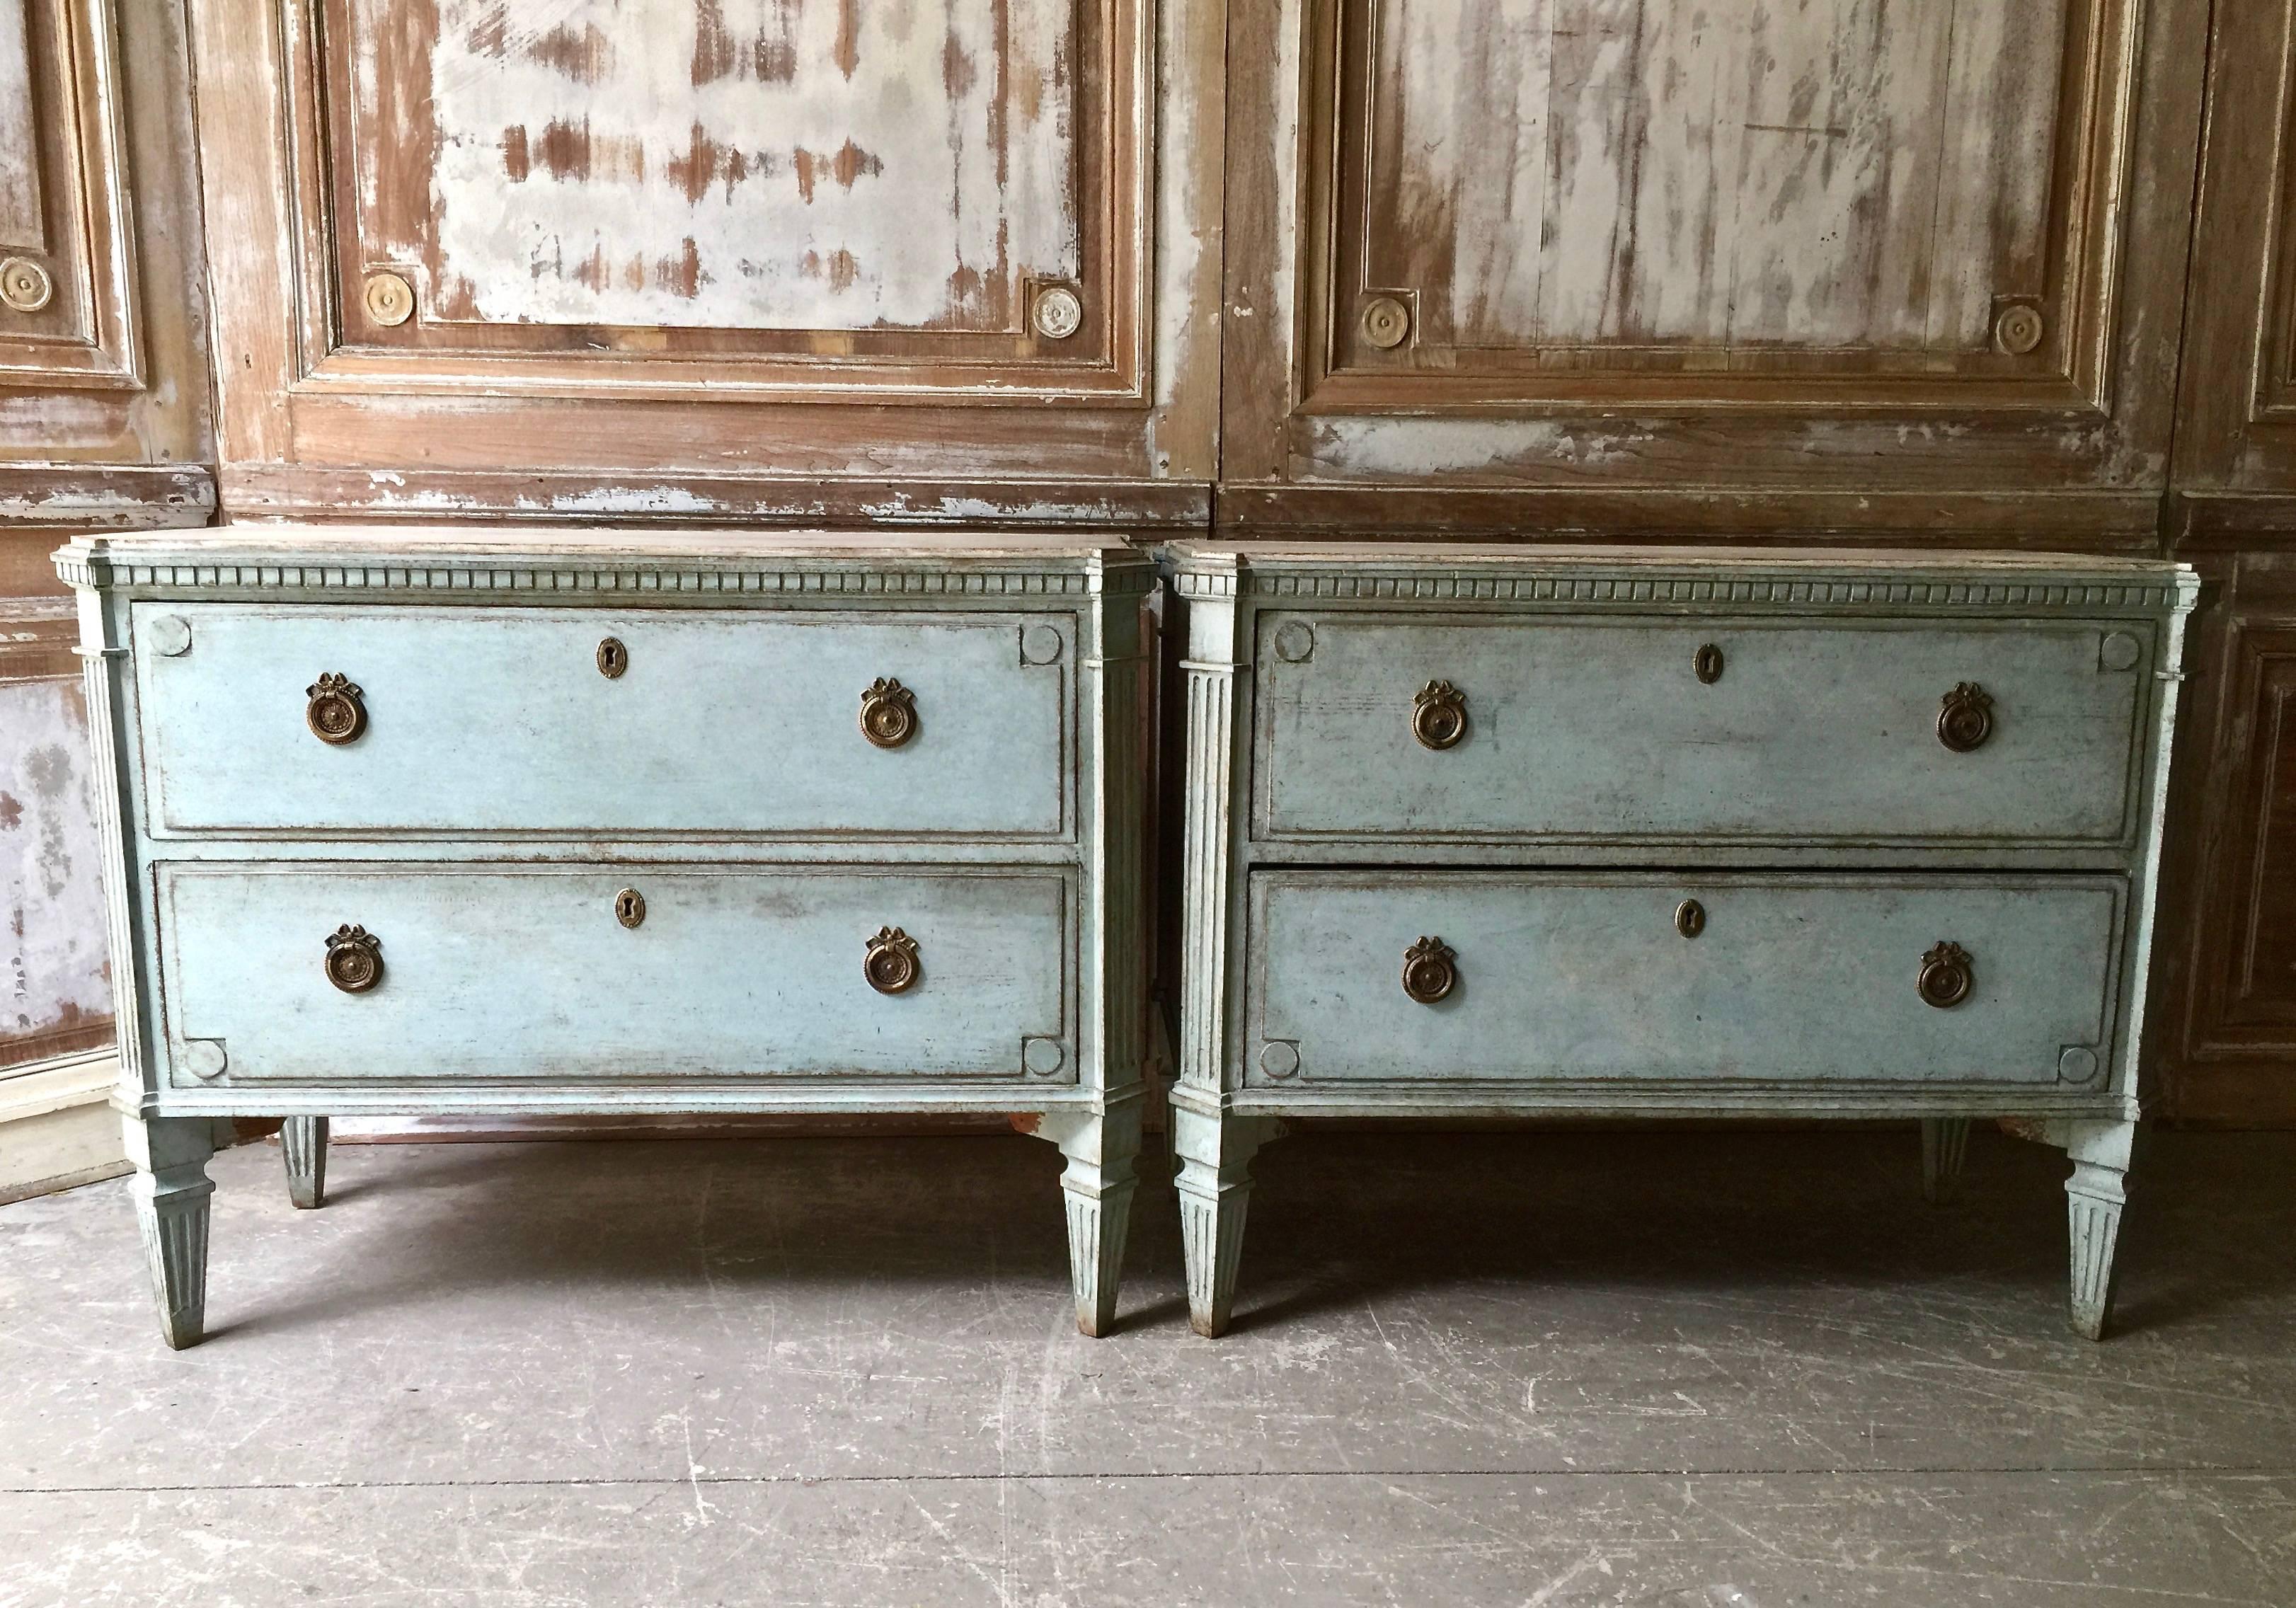 A very handsome pair of 19th century Swedish Gustavian style chests in charming pale blue paint with contrasting marbleized wooden tops. Drawers with raised panels and bronze hardwares.
Canted corner post with dentil molding under the shaped top on